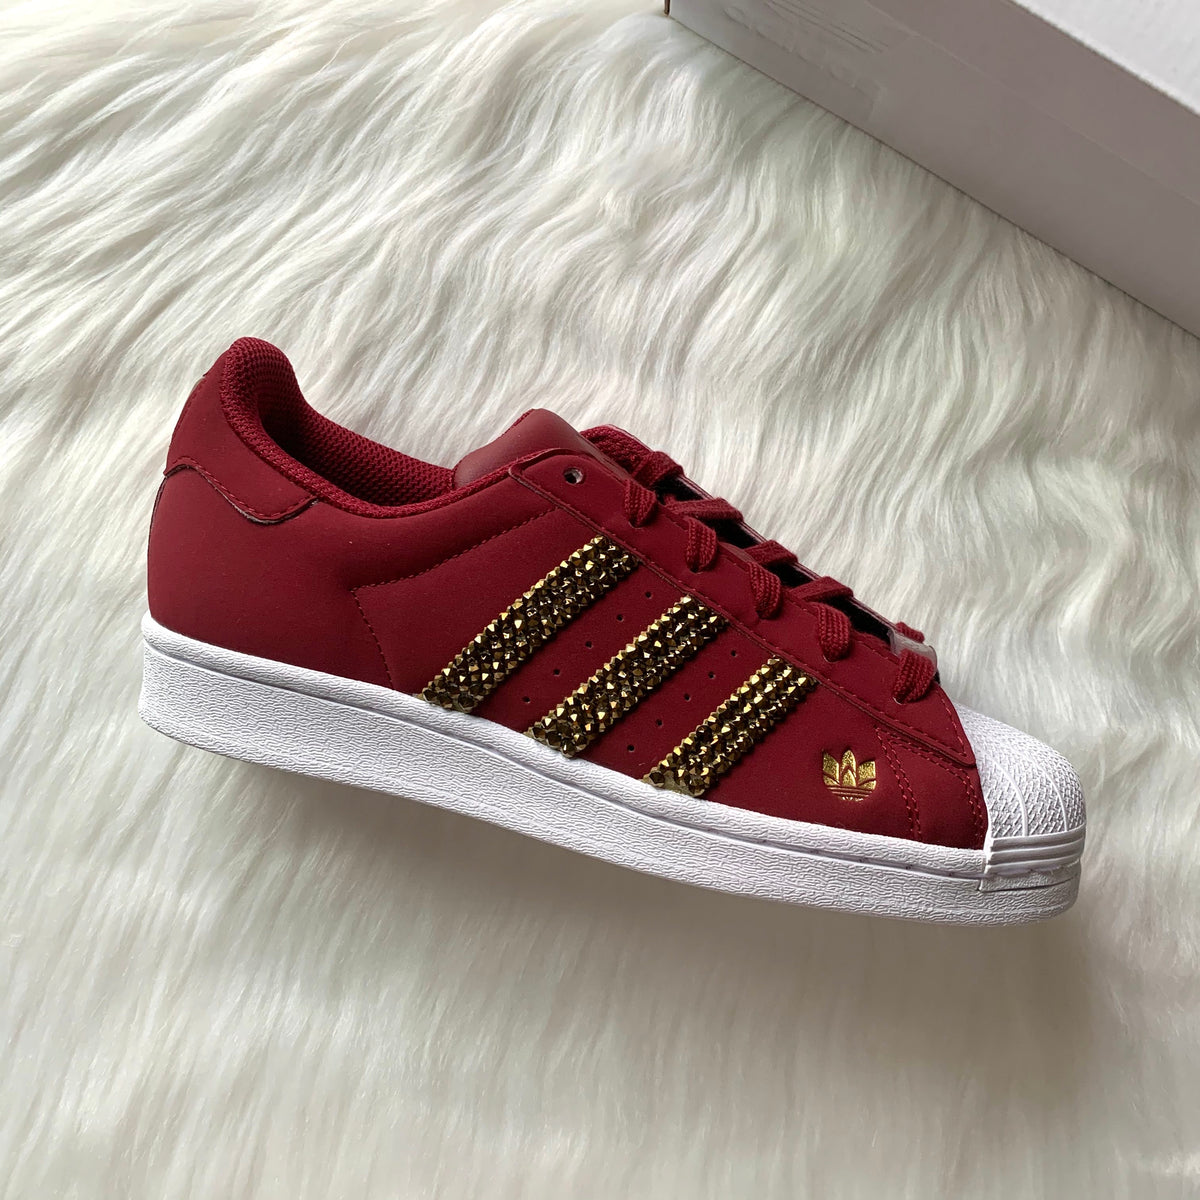 maroon and gold adidas shoes